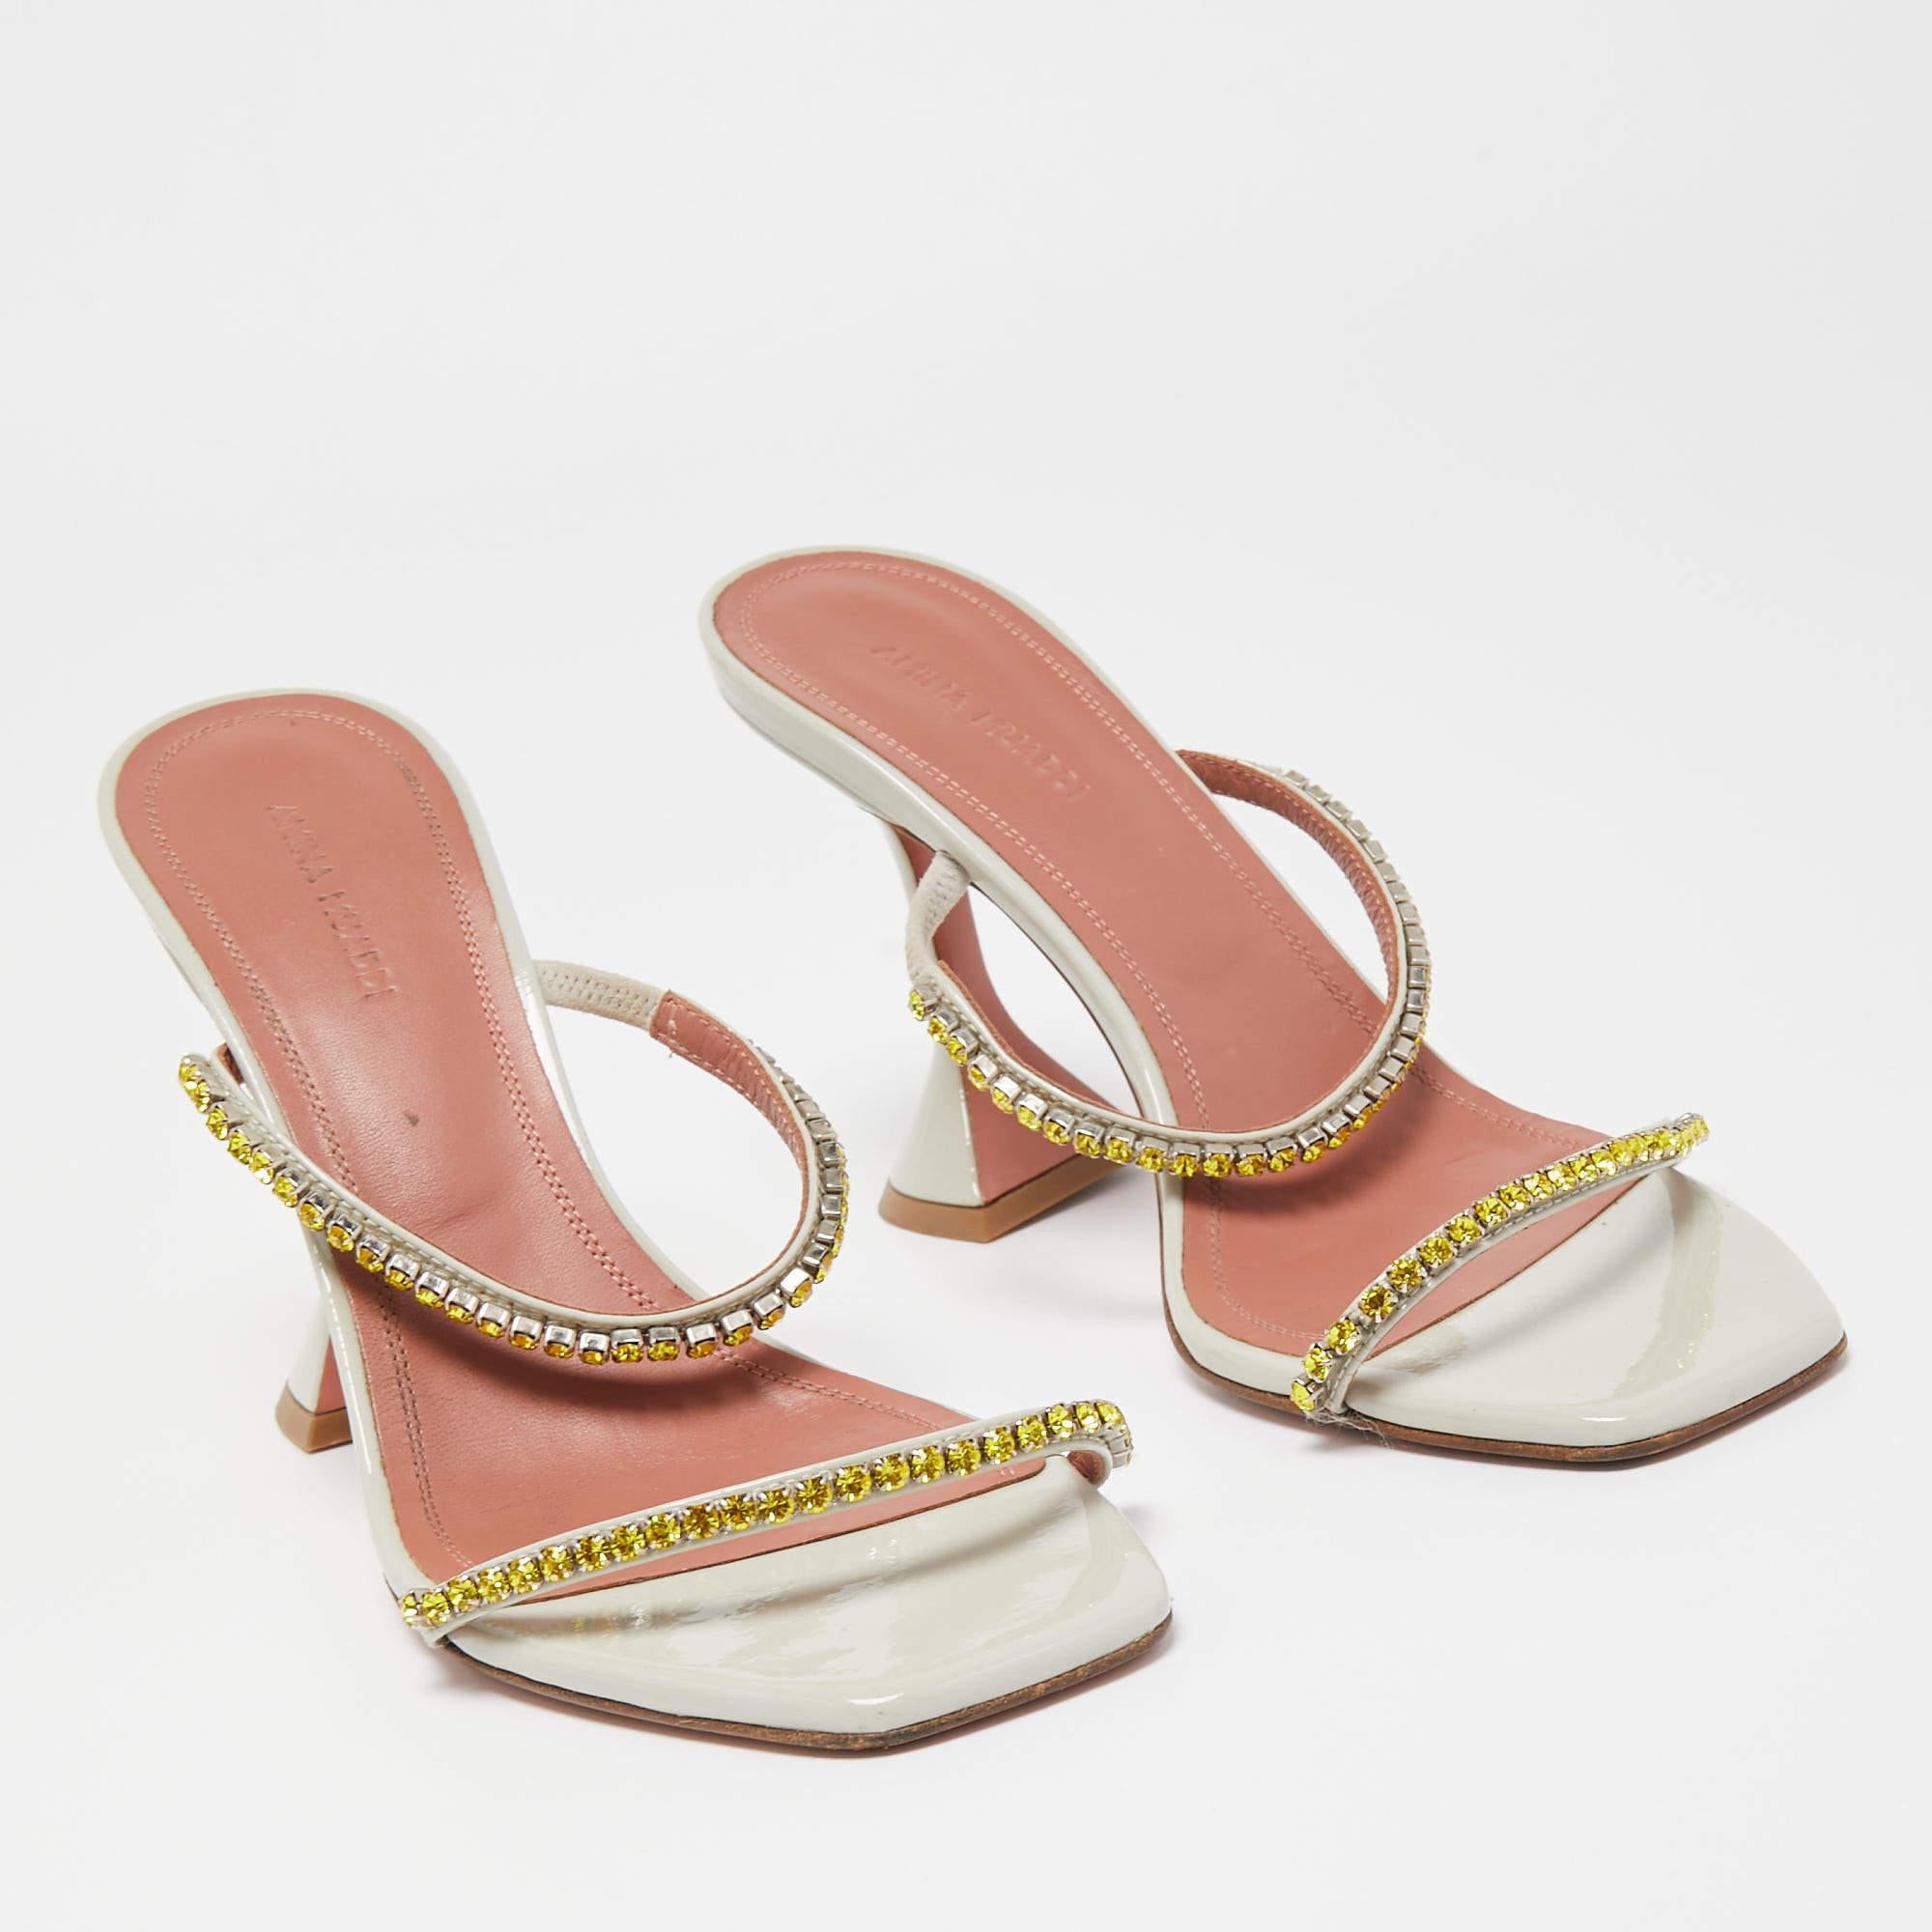 These Amina Muaddi Gilda sandals will frame your feet in an elegant manner. Crafted from quality materials, they display a classy design and comfortable insoles.

Includes: Original Box